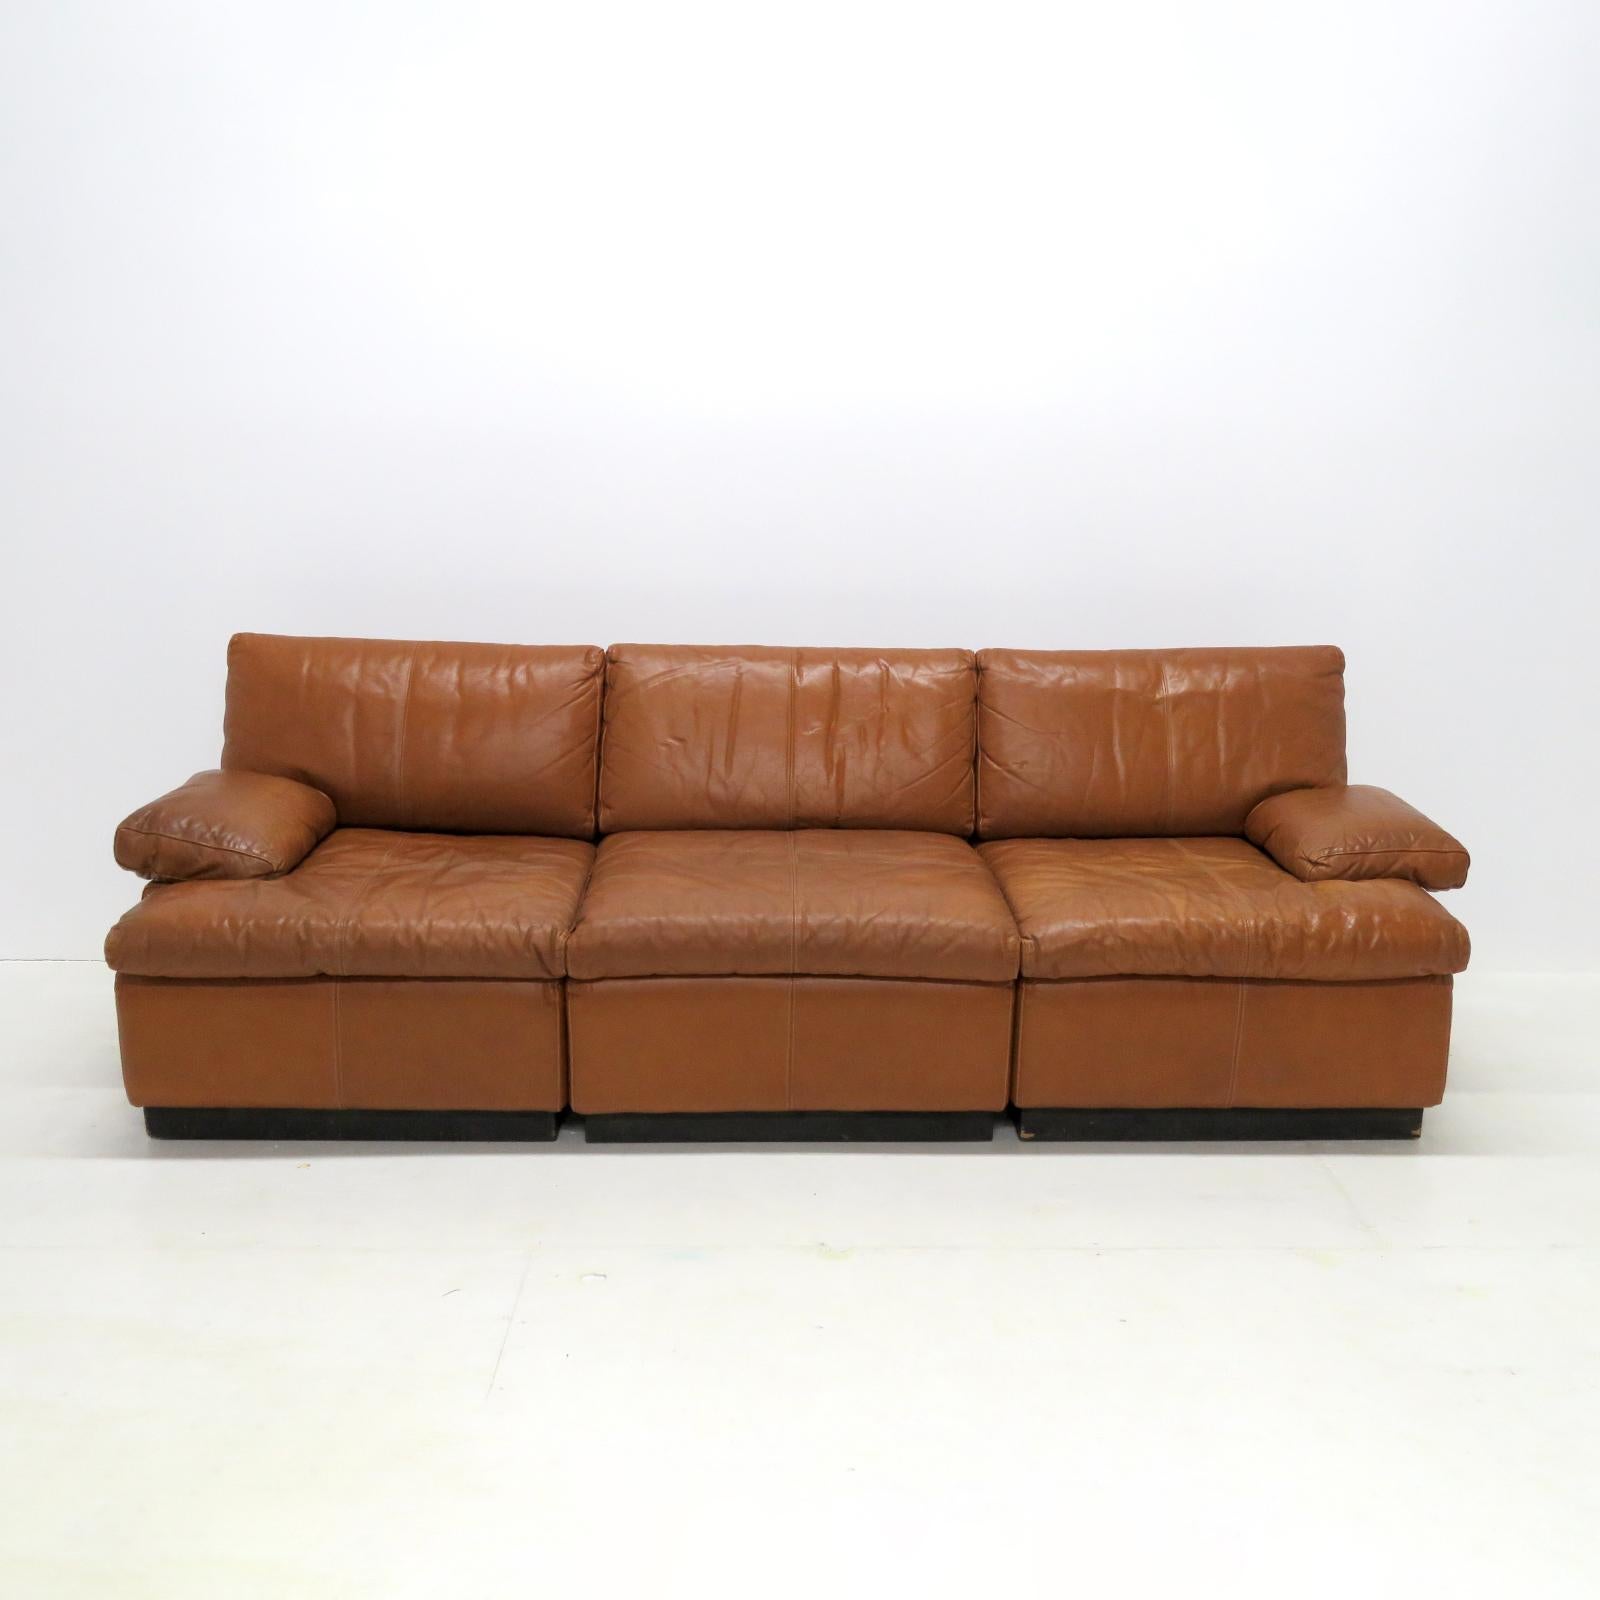 Wonderful modular sofa by OY BJ Dahlqvist AB, for BD Furniture, Jakobstad, Finland, 1070, with thick cognac colored leather, six loose cushions on a leather clad frame, marked.